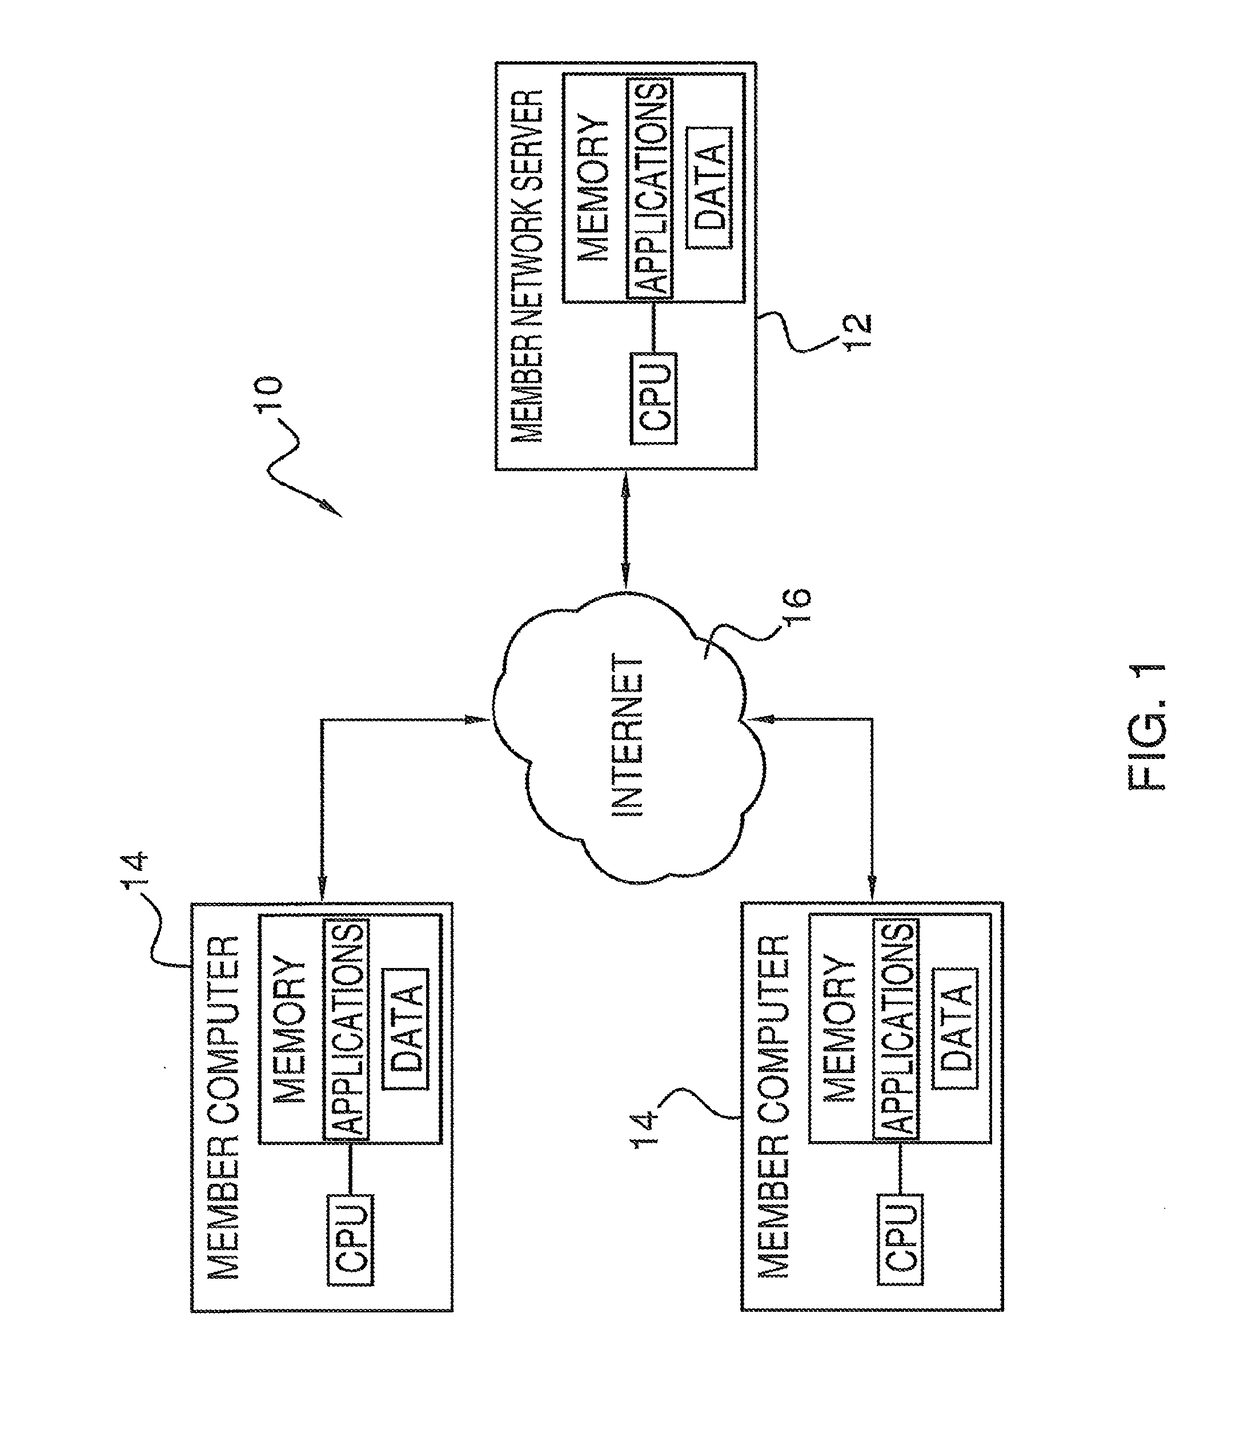 Online social network system and method for collaboritive risk sharing